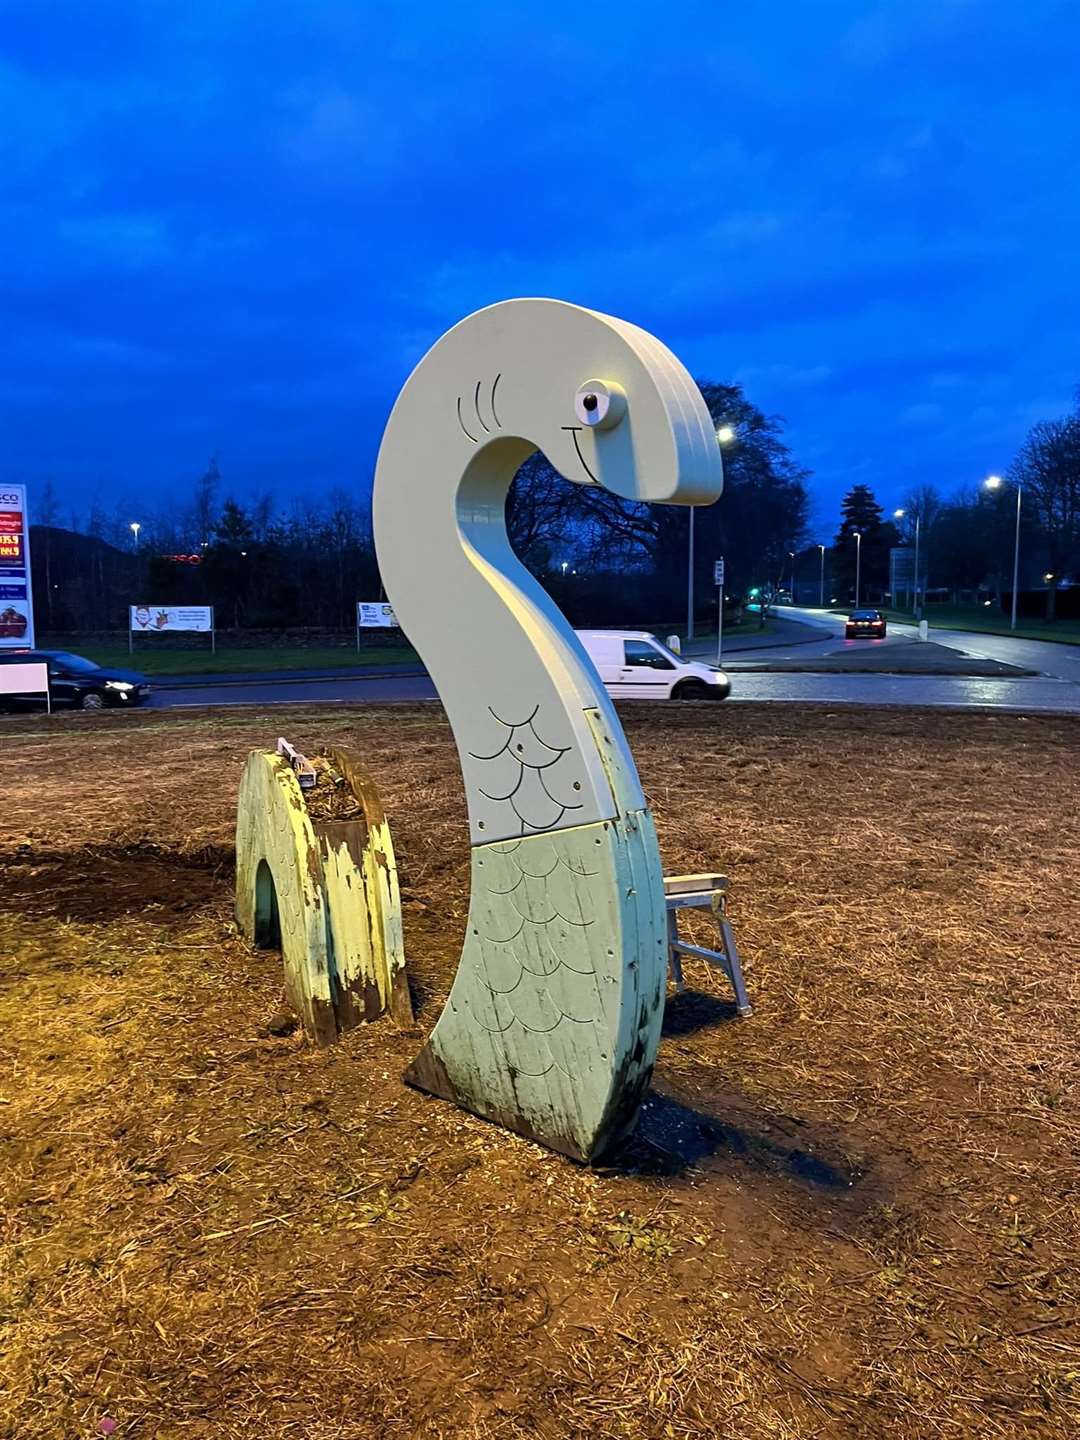 A first look at Nessie's statue at Holm roundabout.